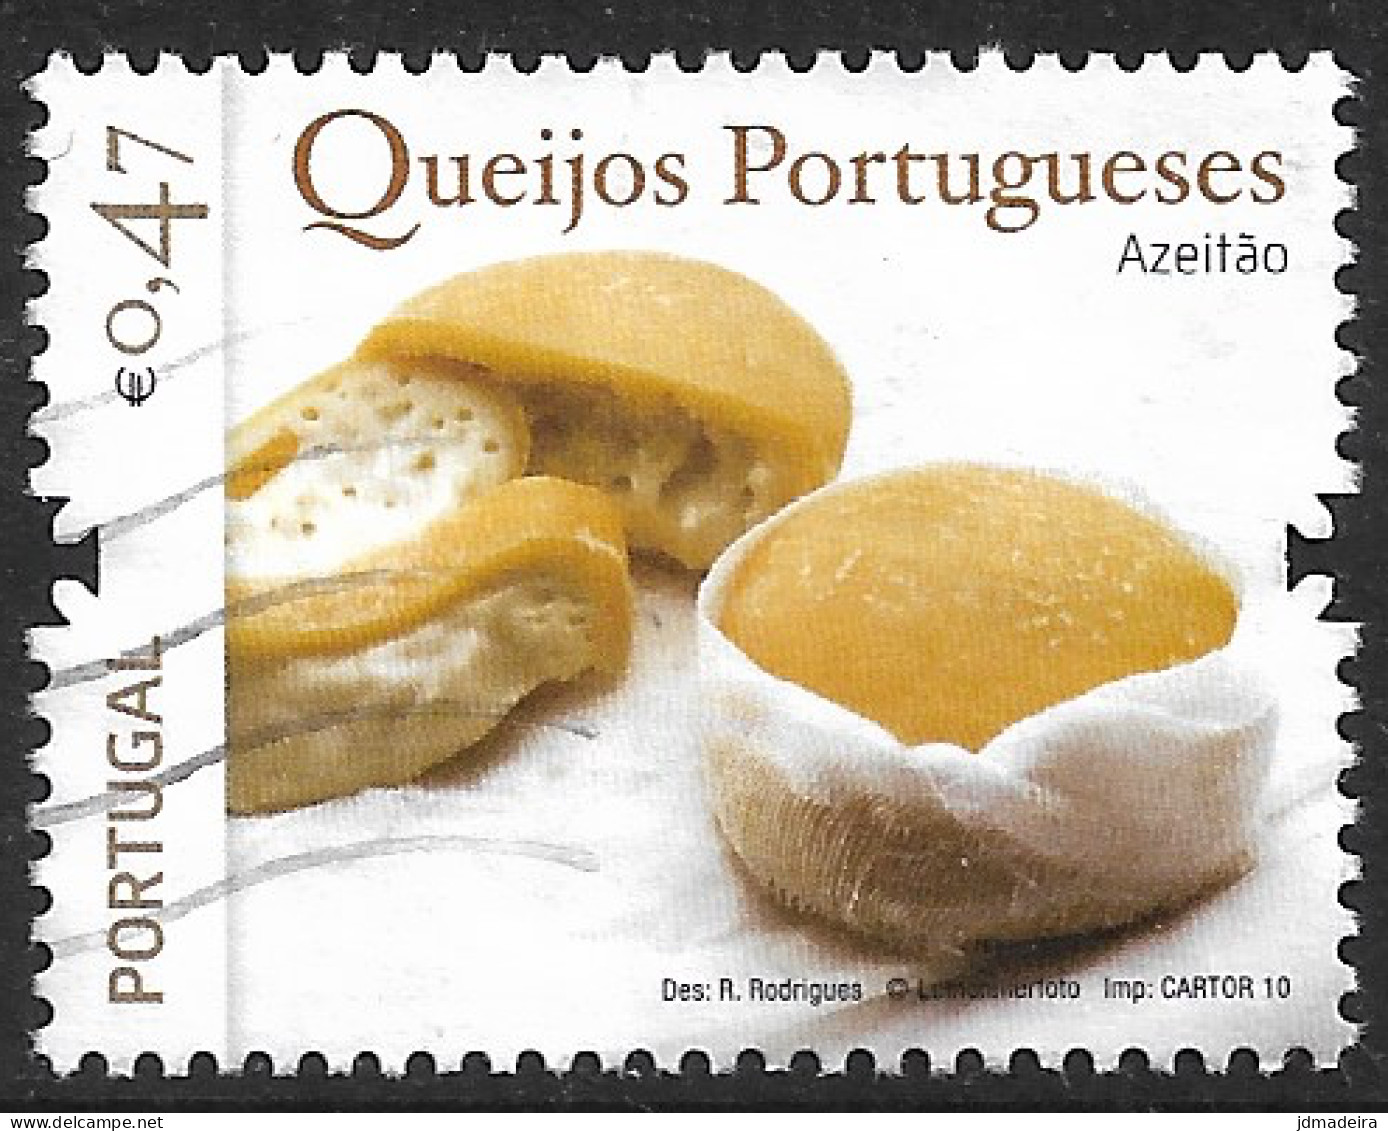 Portugal – 2010 Cheeses 0,47 Euros Used Stamp - Oblitérés